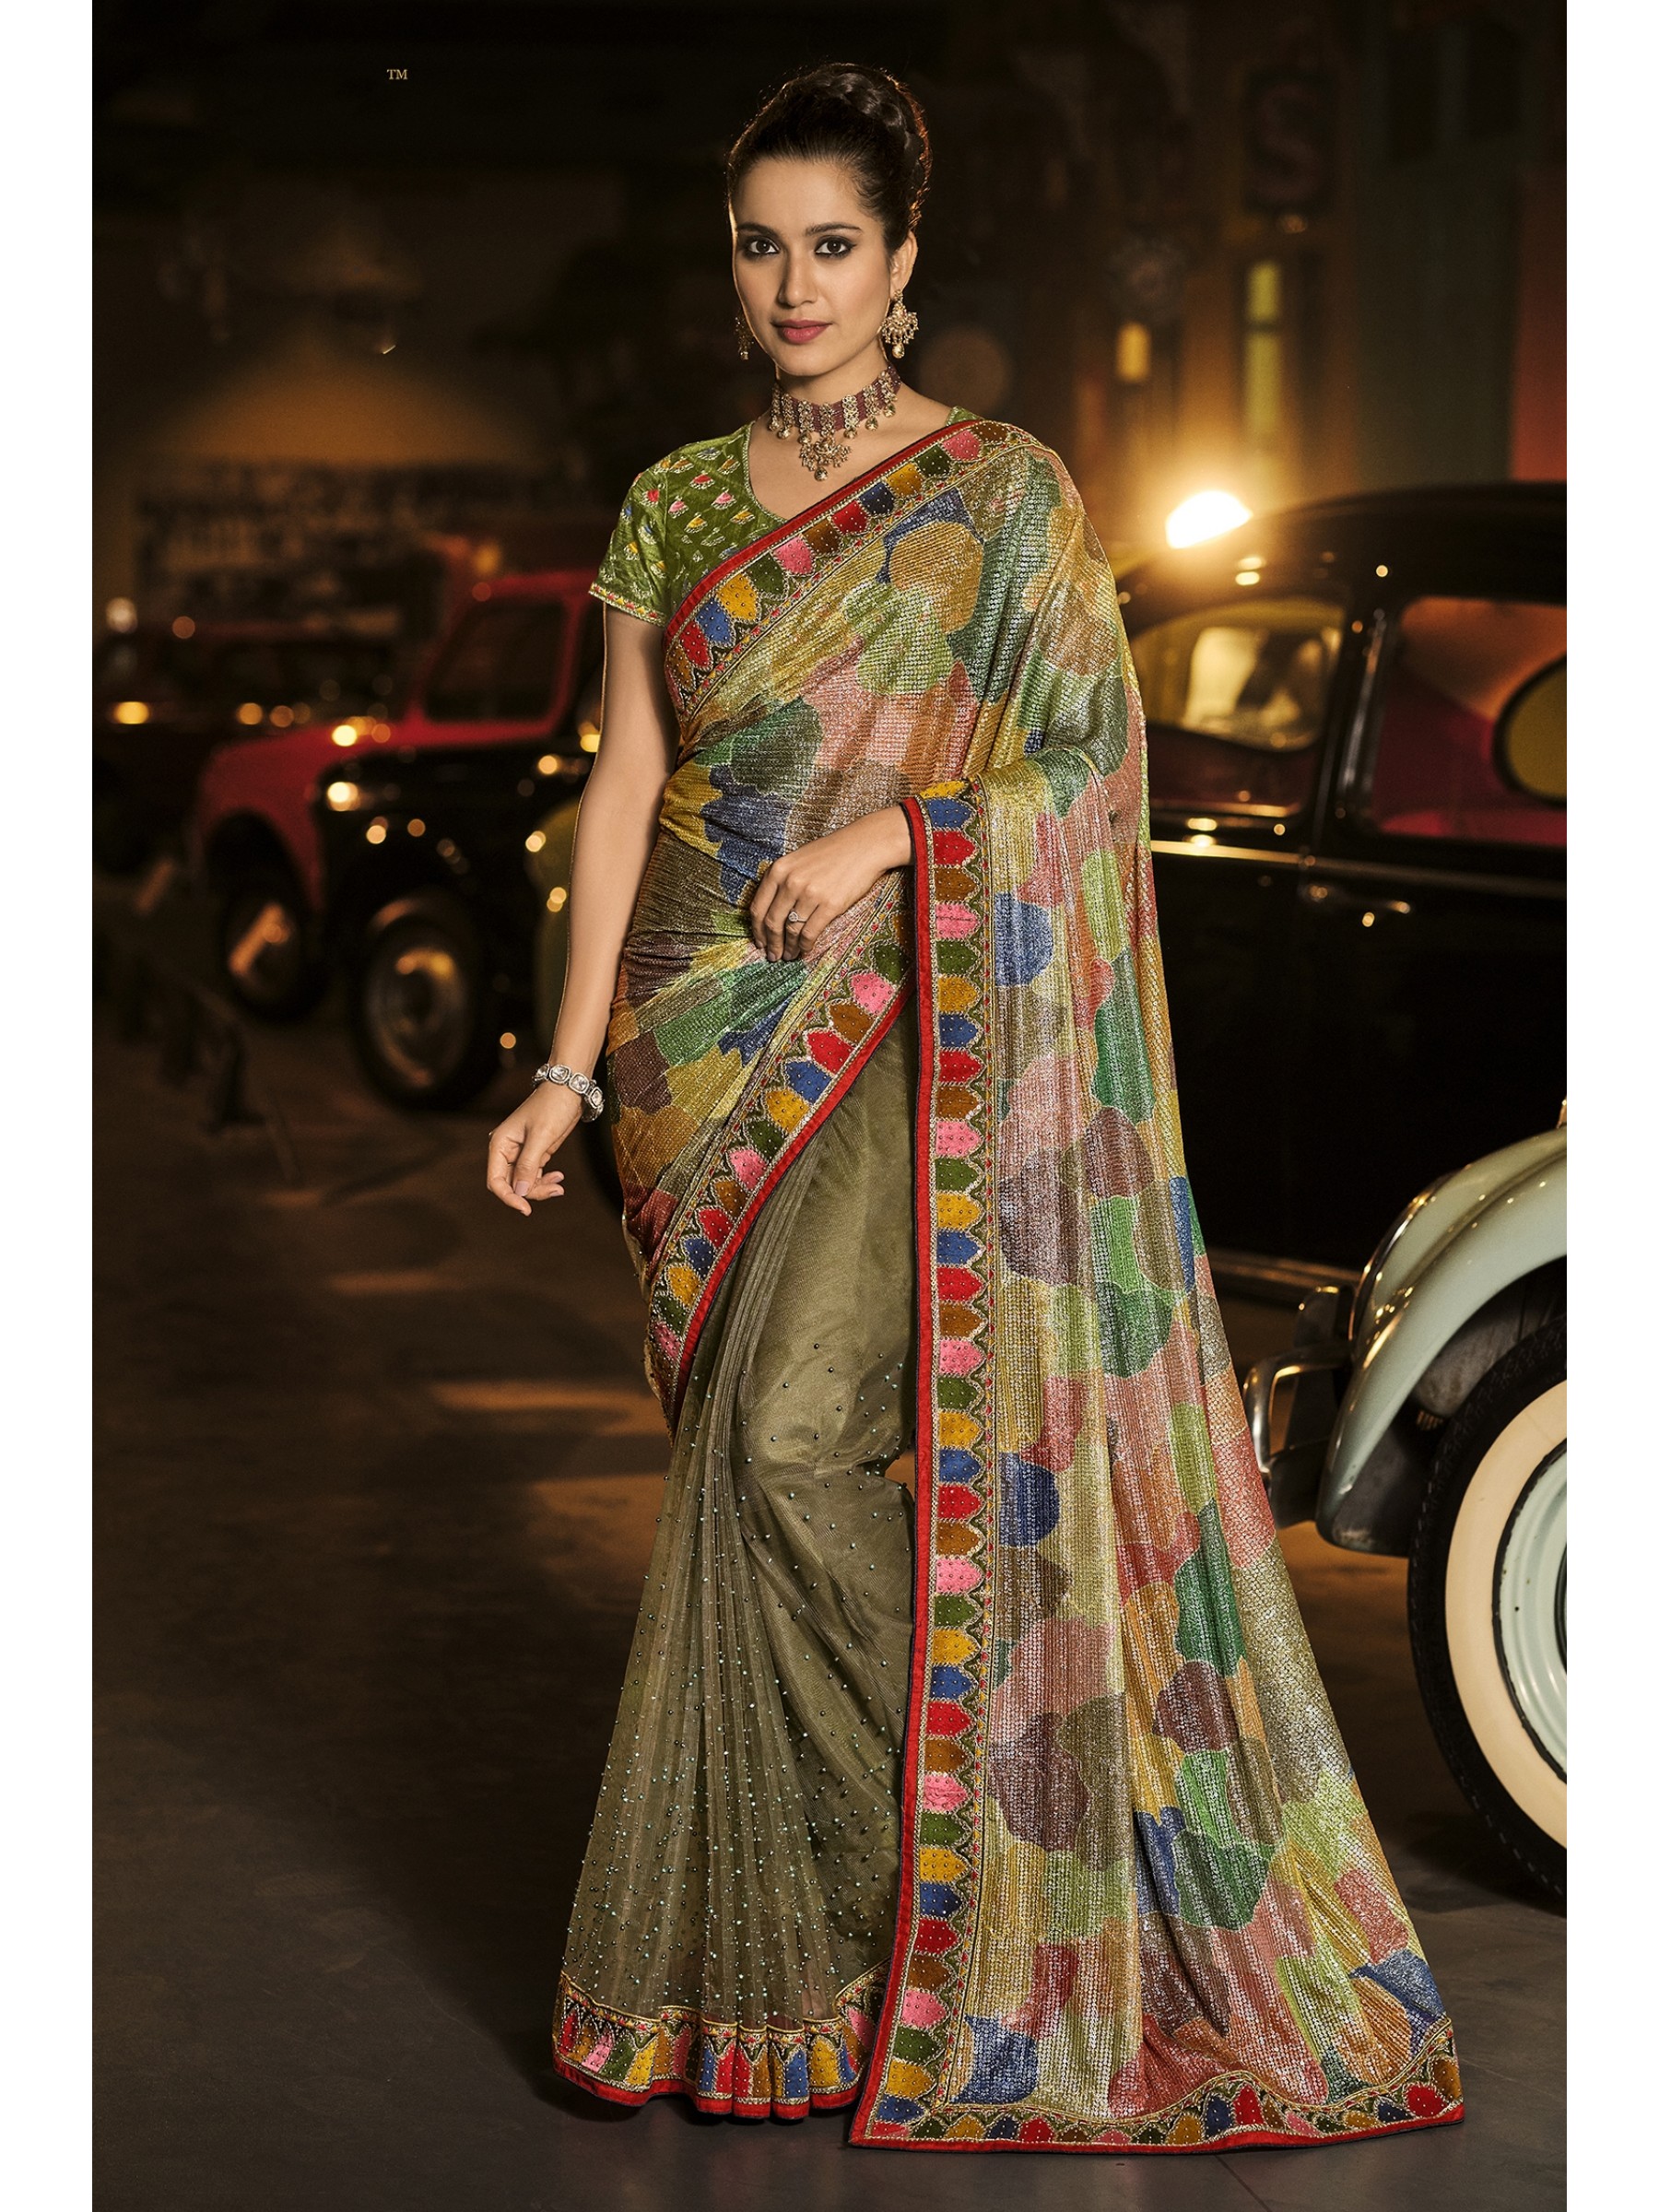 Fancy Laycra Wedding Wear Saree In Multi Color WIth Embrodiery Work 